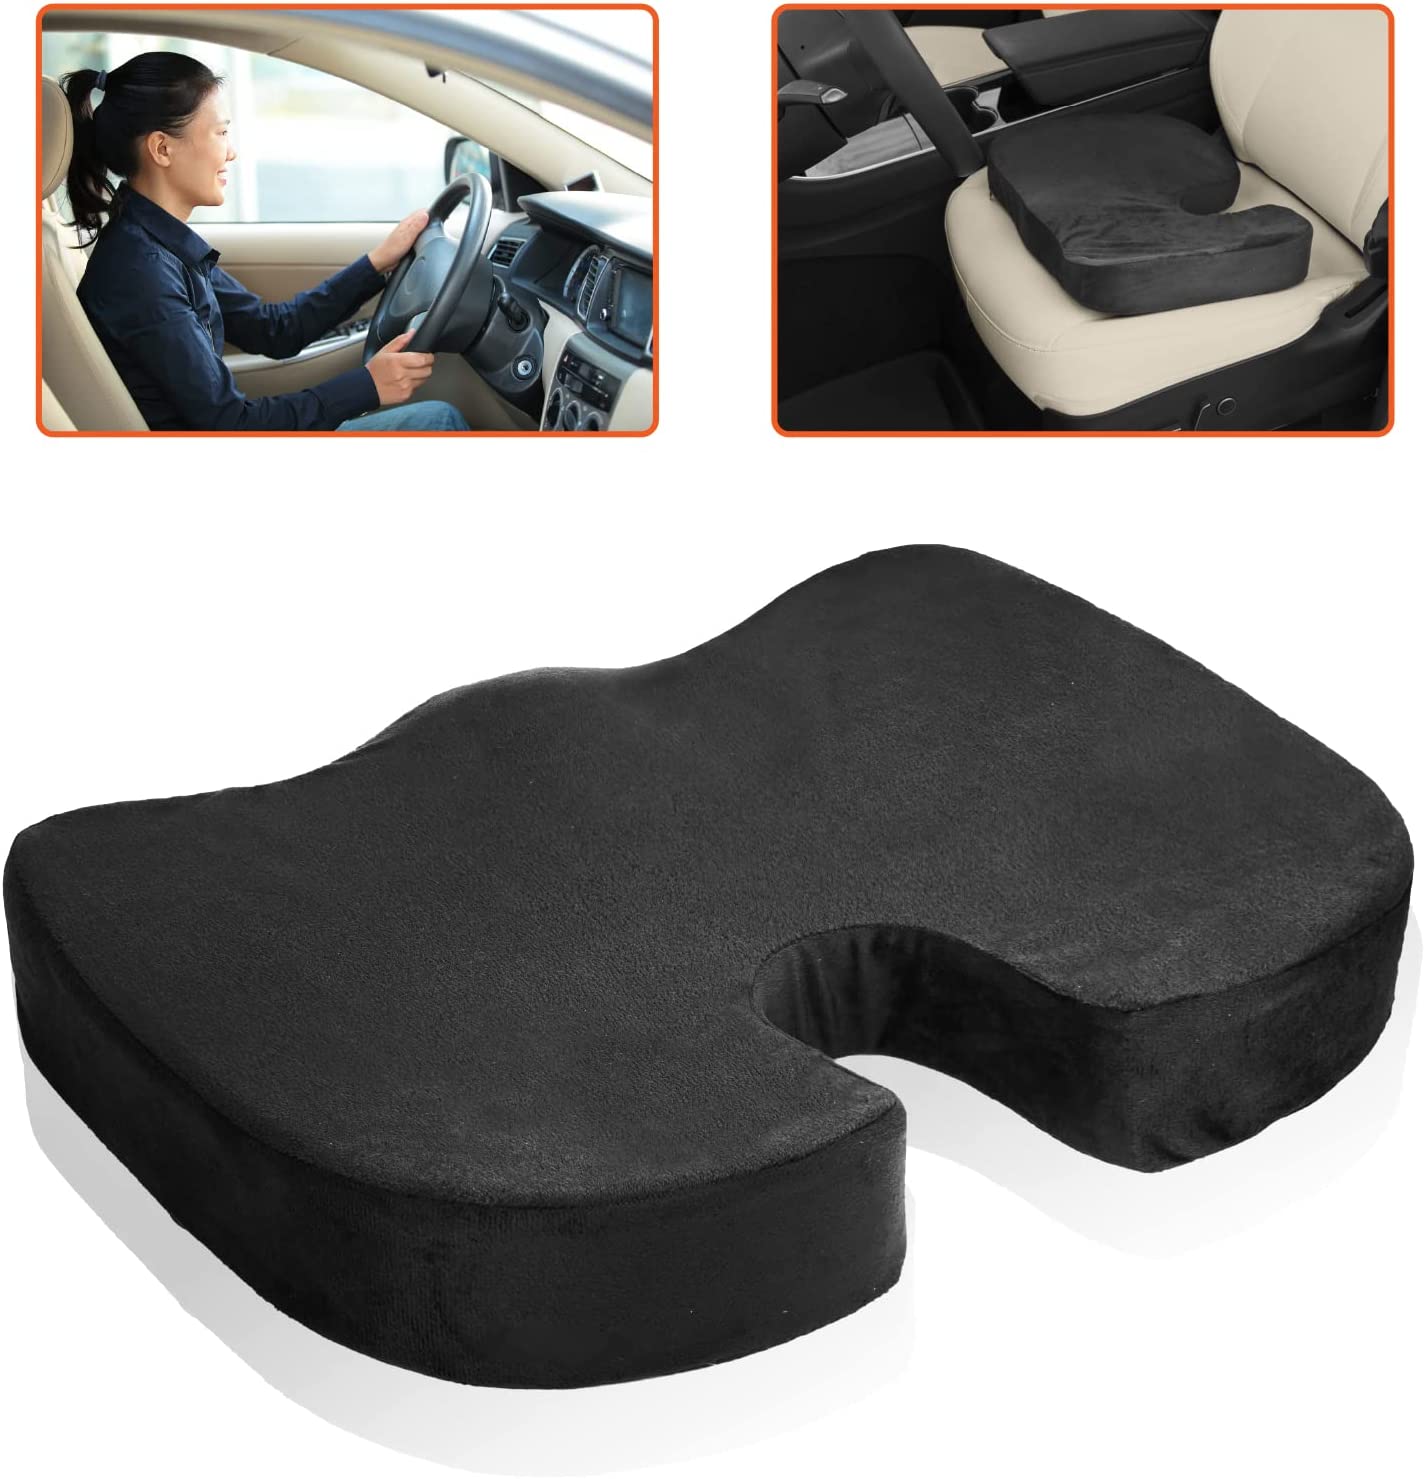 Trobo Seat Cushion, Car Pillow for Driving Seat to Improve Sciatica,  Coccyx, Hip and Tailbone Pain, Ergonomic Memory Foam Chair Pad for Lower  Back